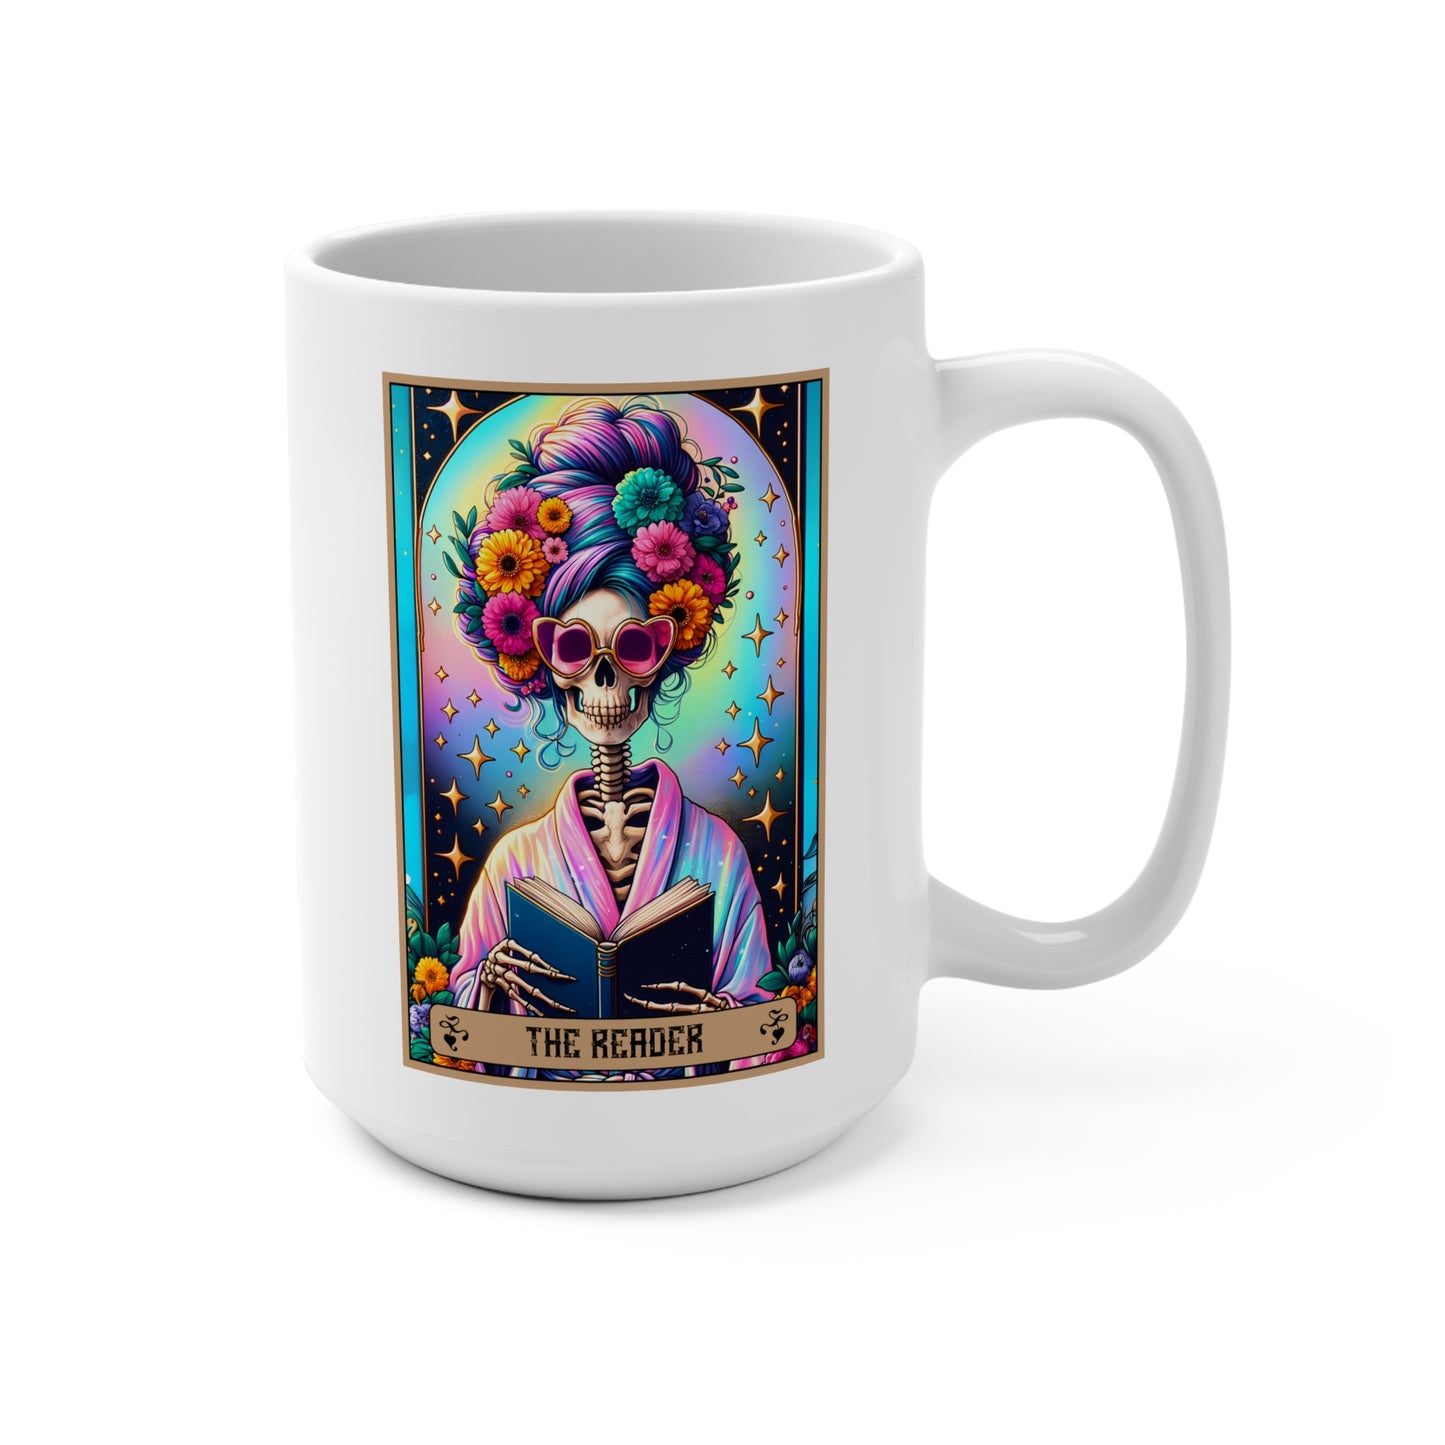 The Reader - MOTHER Amazing Loving Strong Happy Selfless Graceful Mug